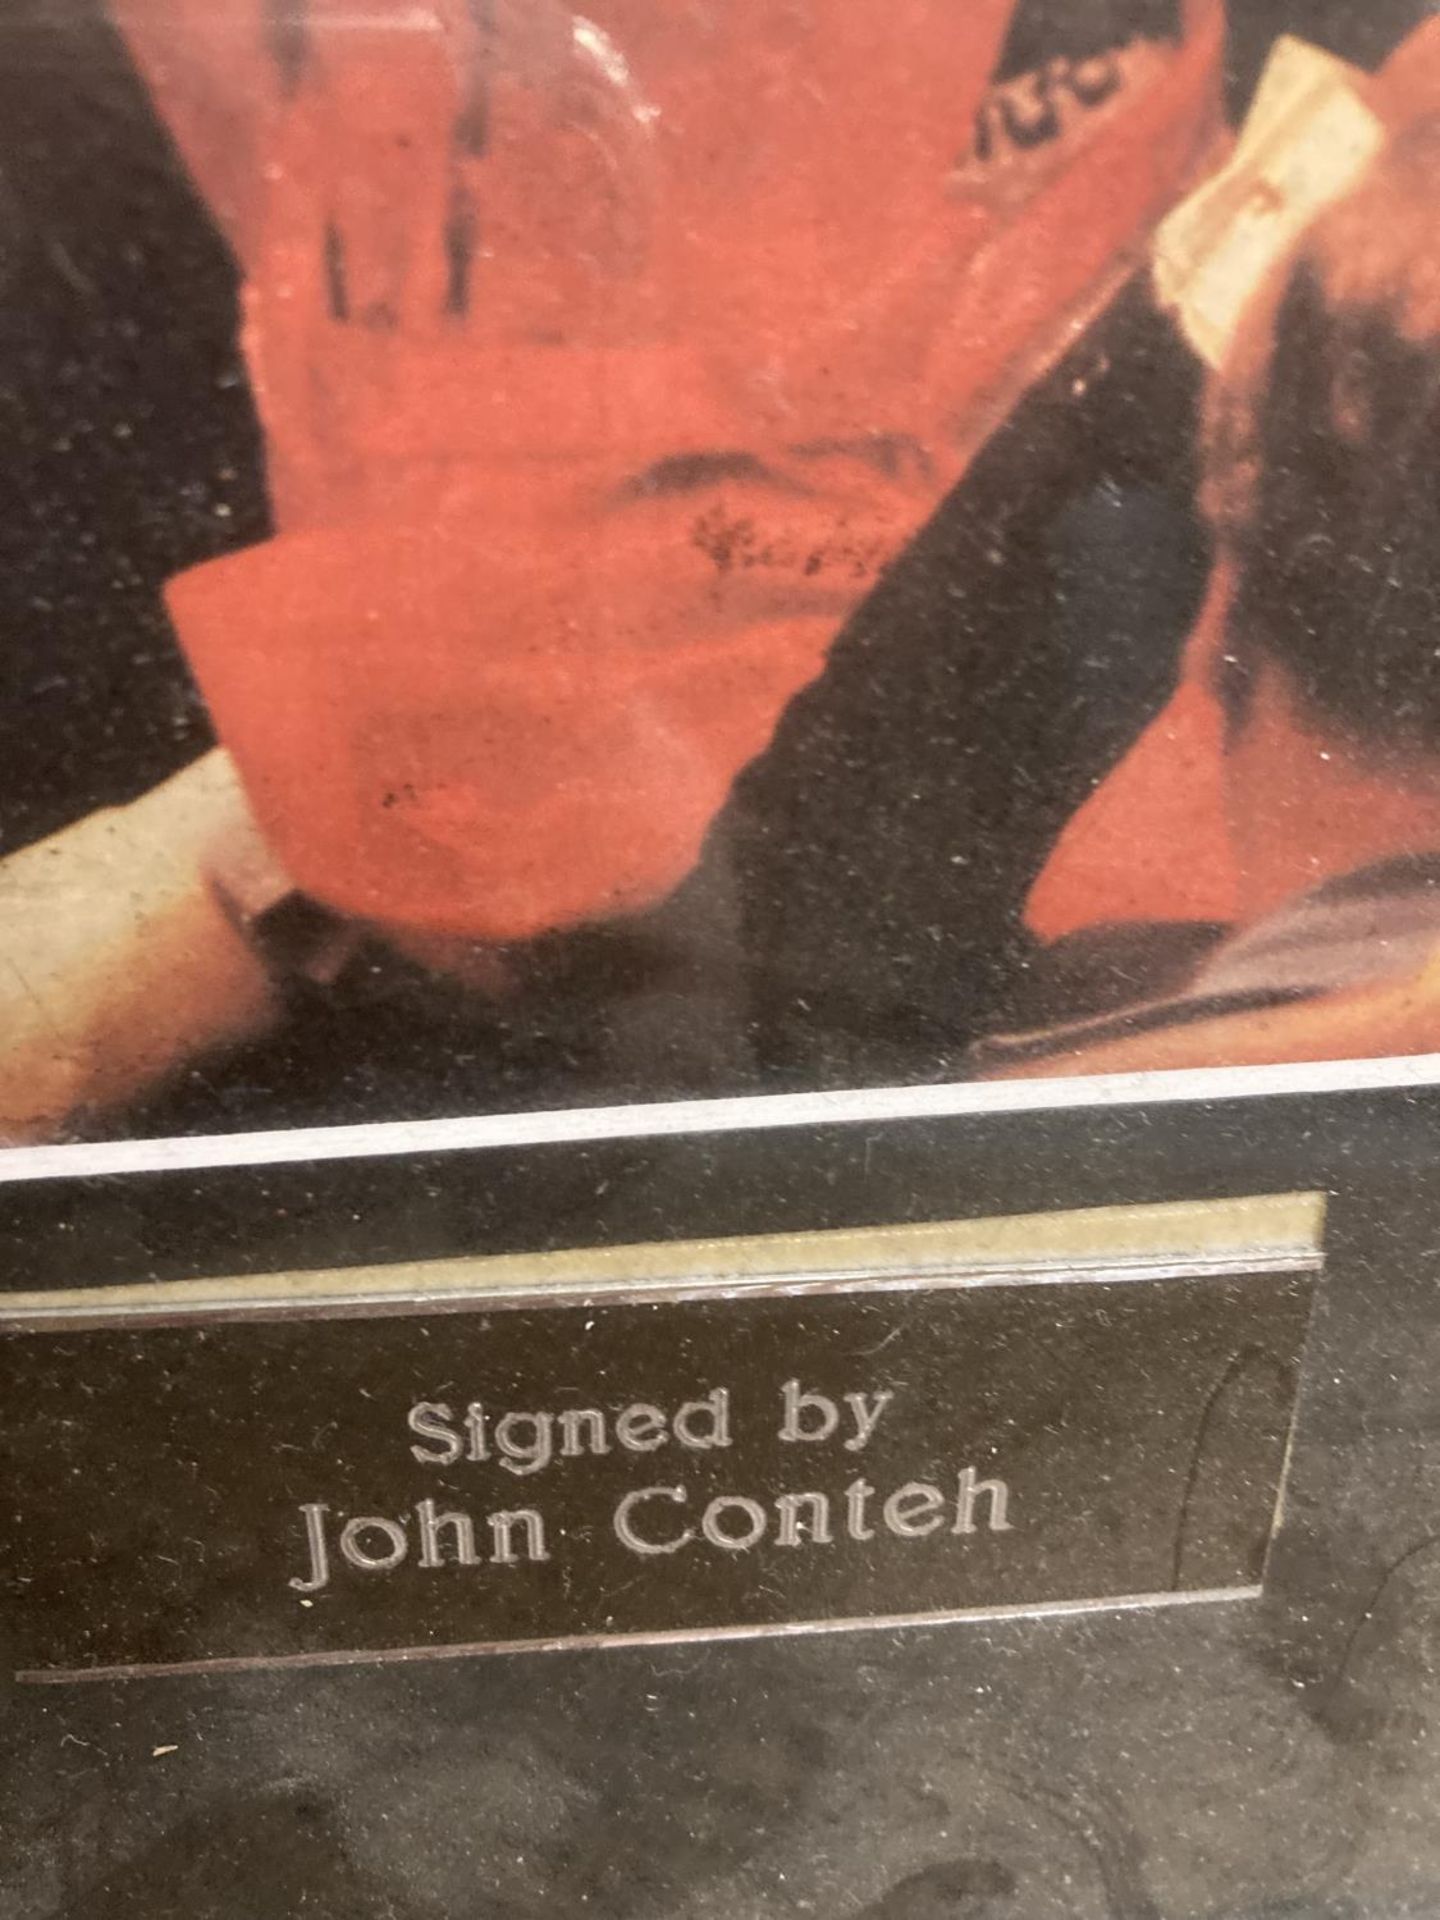 A FRAMED & SIGNED JOHN CONTEH BOXING GLOVE & AUTOBIOGRAPHY BOOK - Image 5 of 5